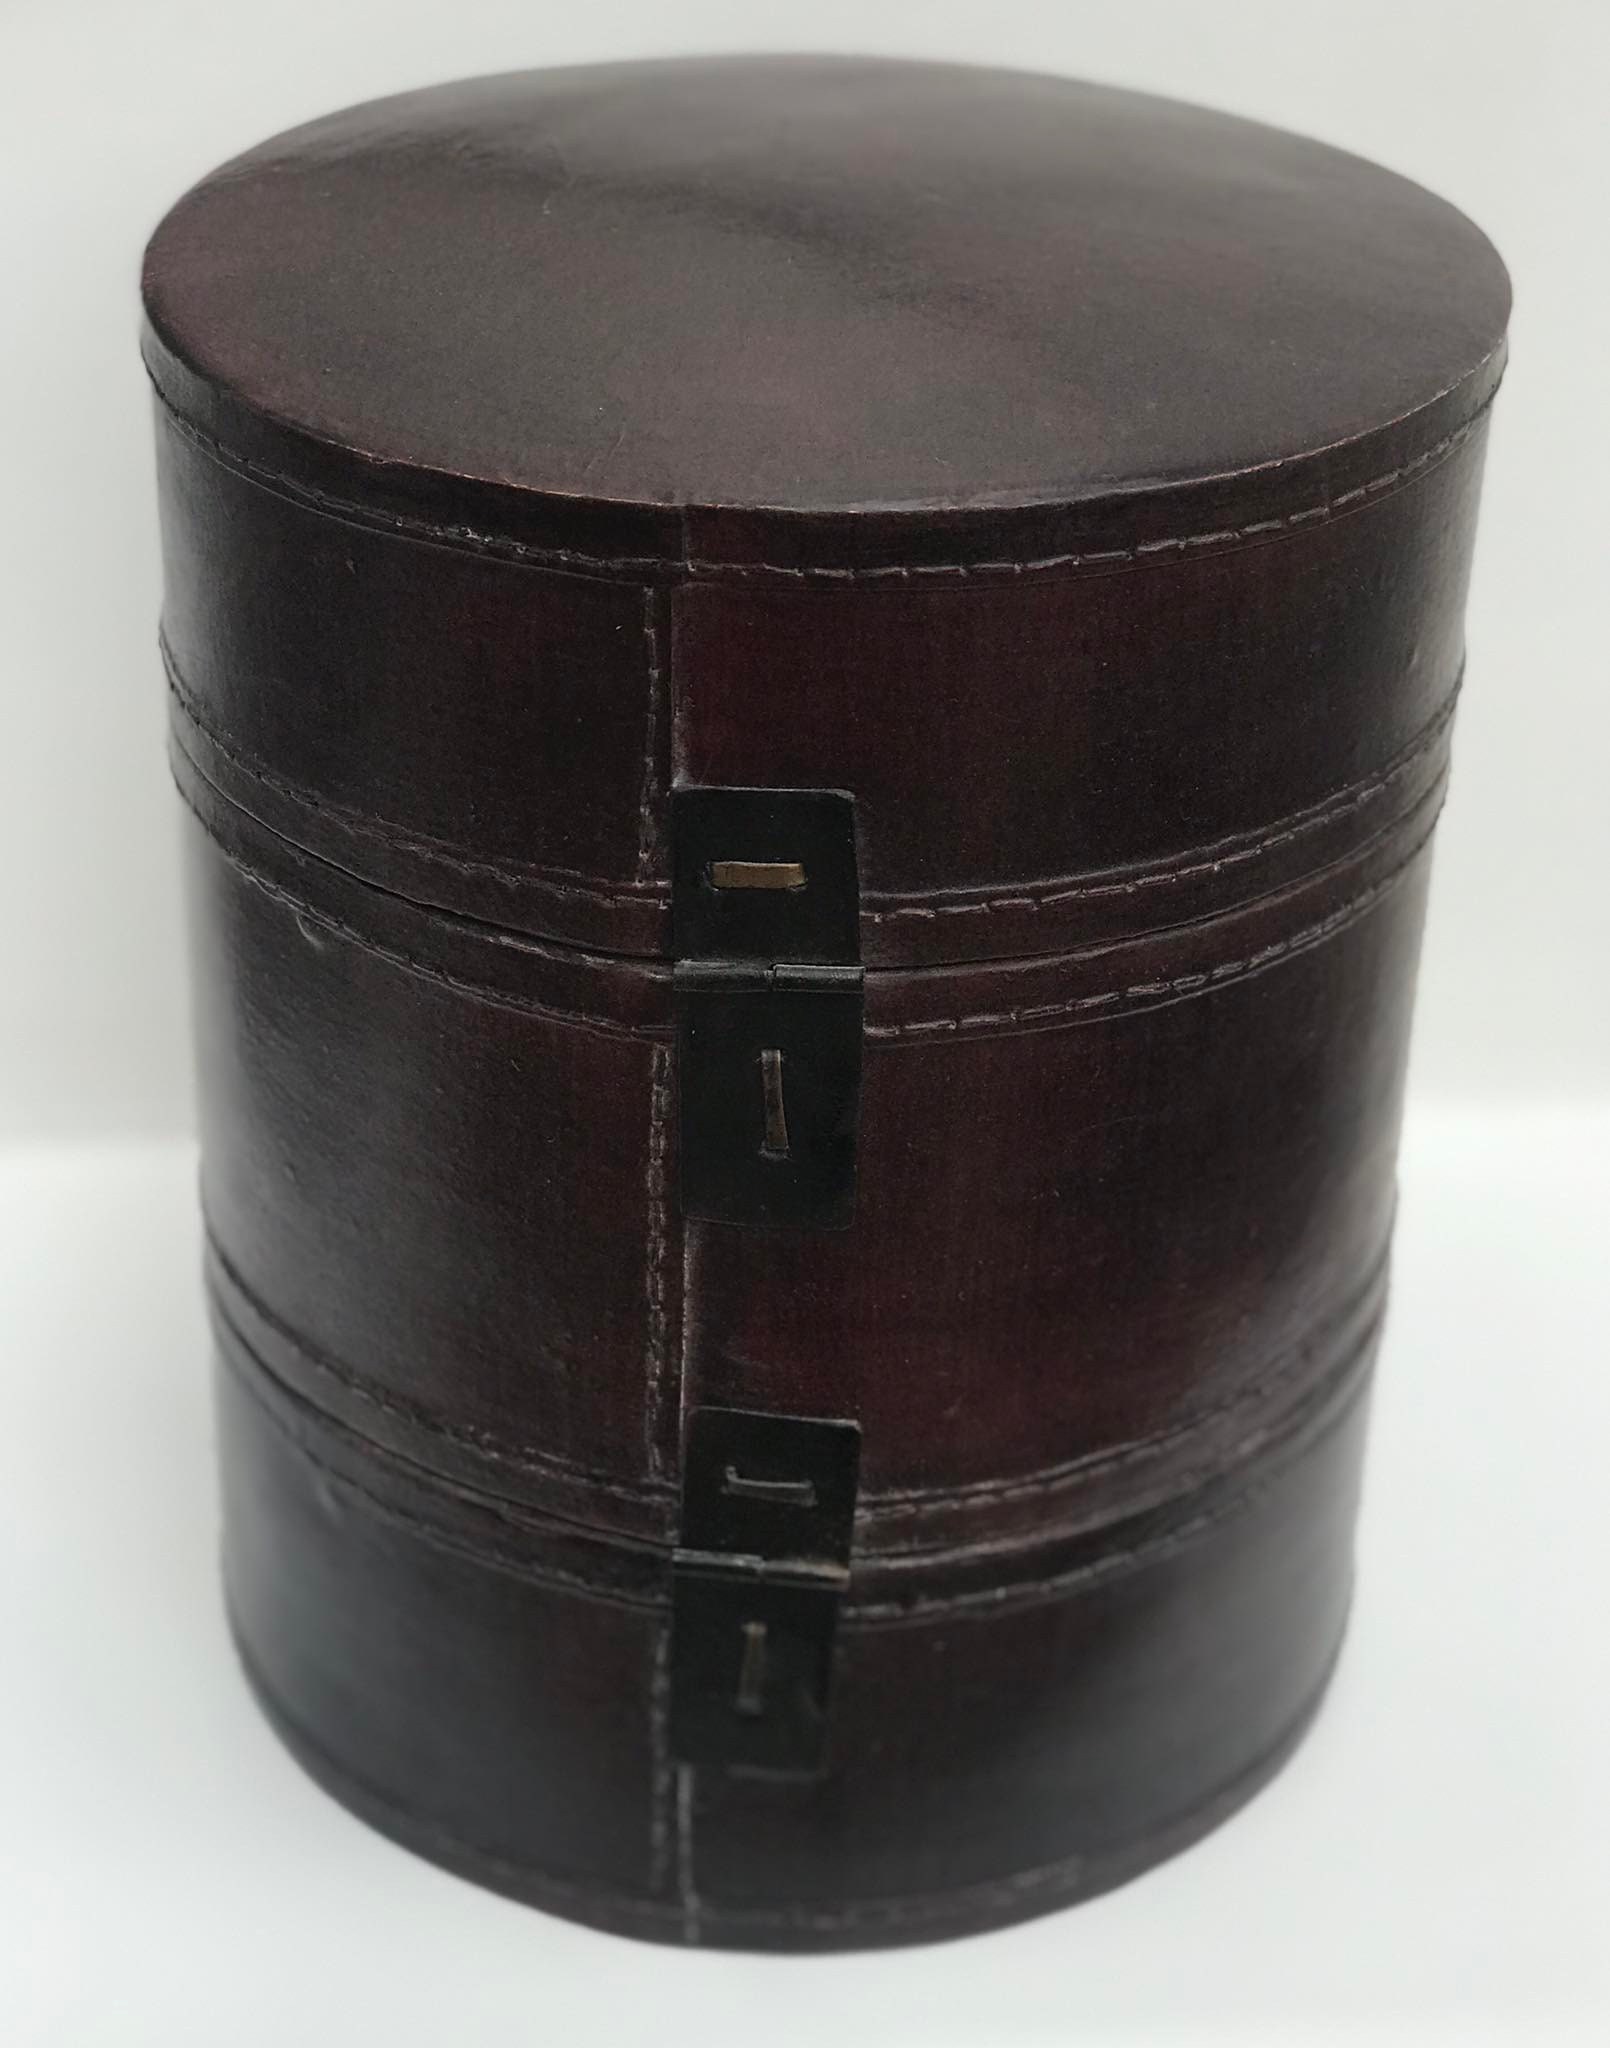 Hat Box Double Chinese Antique Leather Lacquered Decorative Box Brass Lock  And Lid Mandarin Antique Round Wooden Storage Box Decorative Item